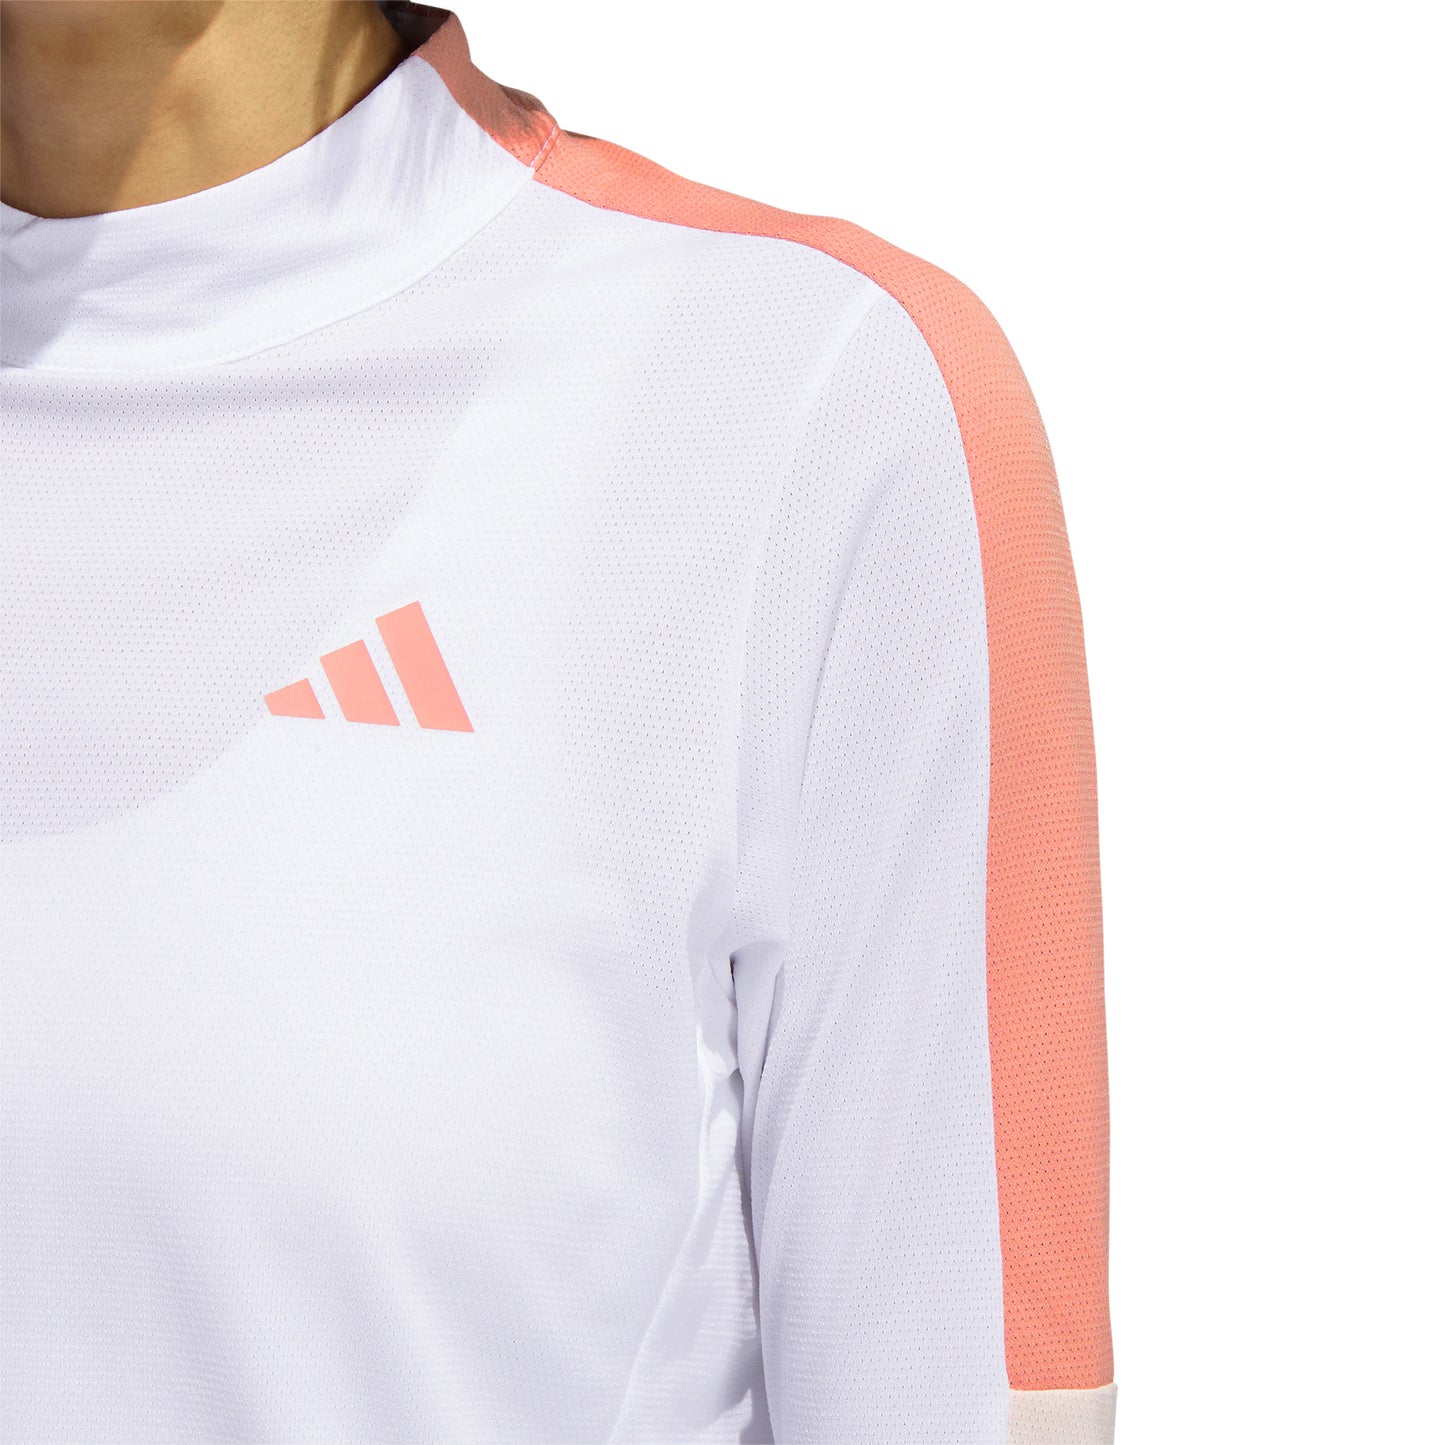 adidas Ladies Long Sleeve Colourblock Top with Mock Neck in White